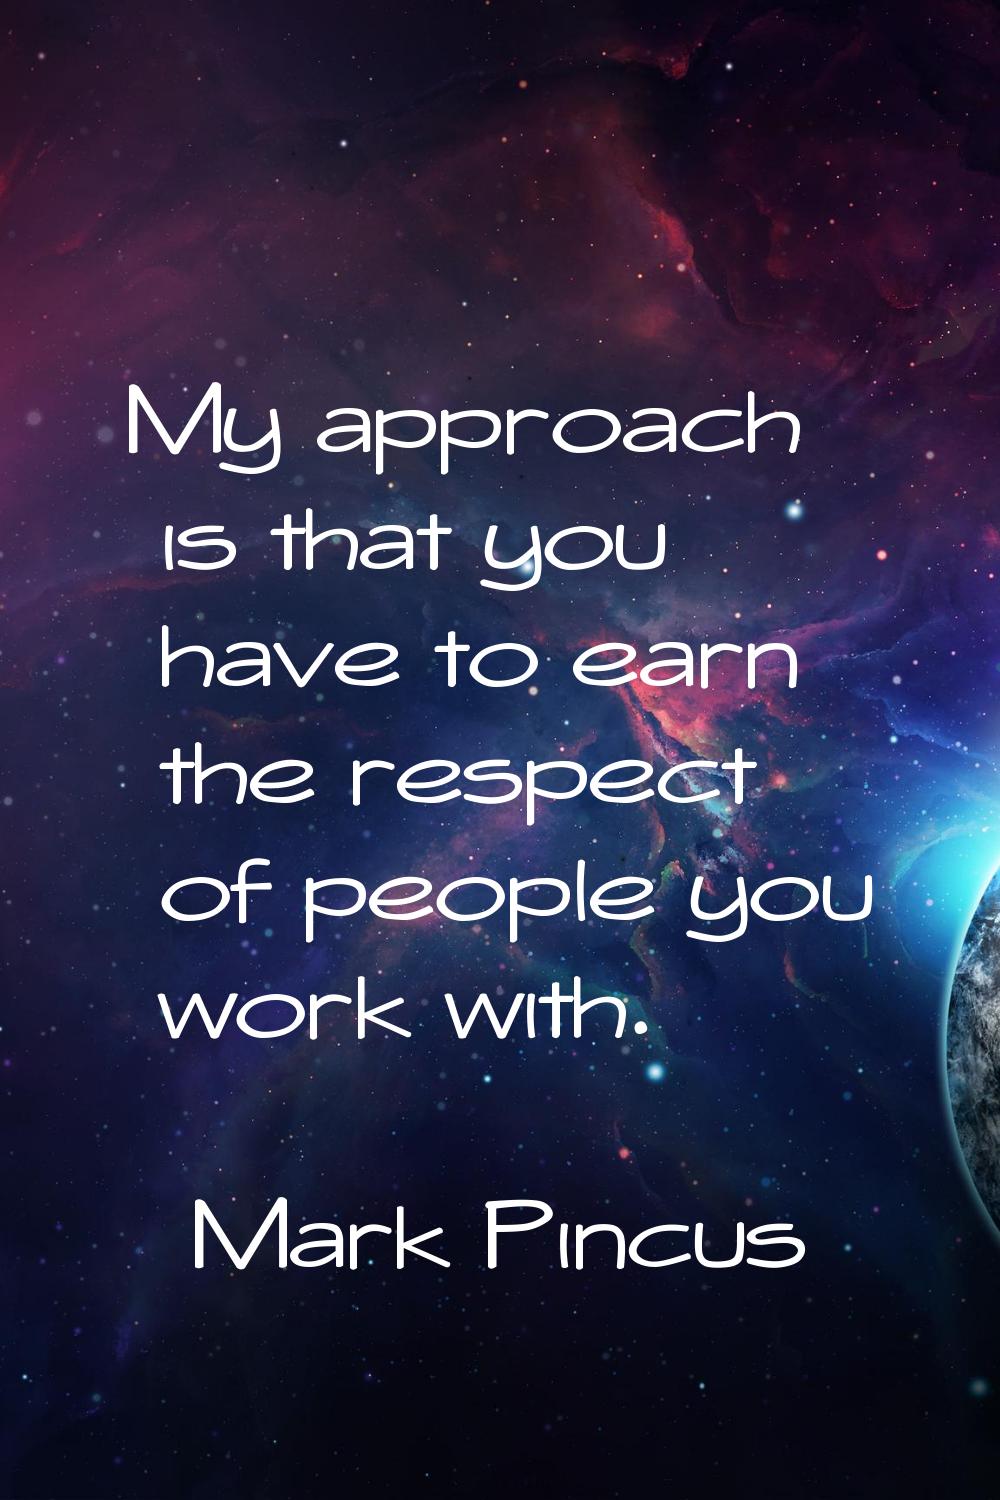 My approach is that you have to earn the respect of people you work with.